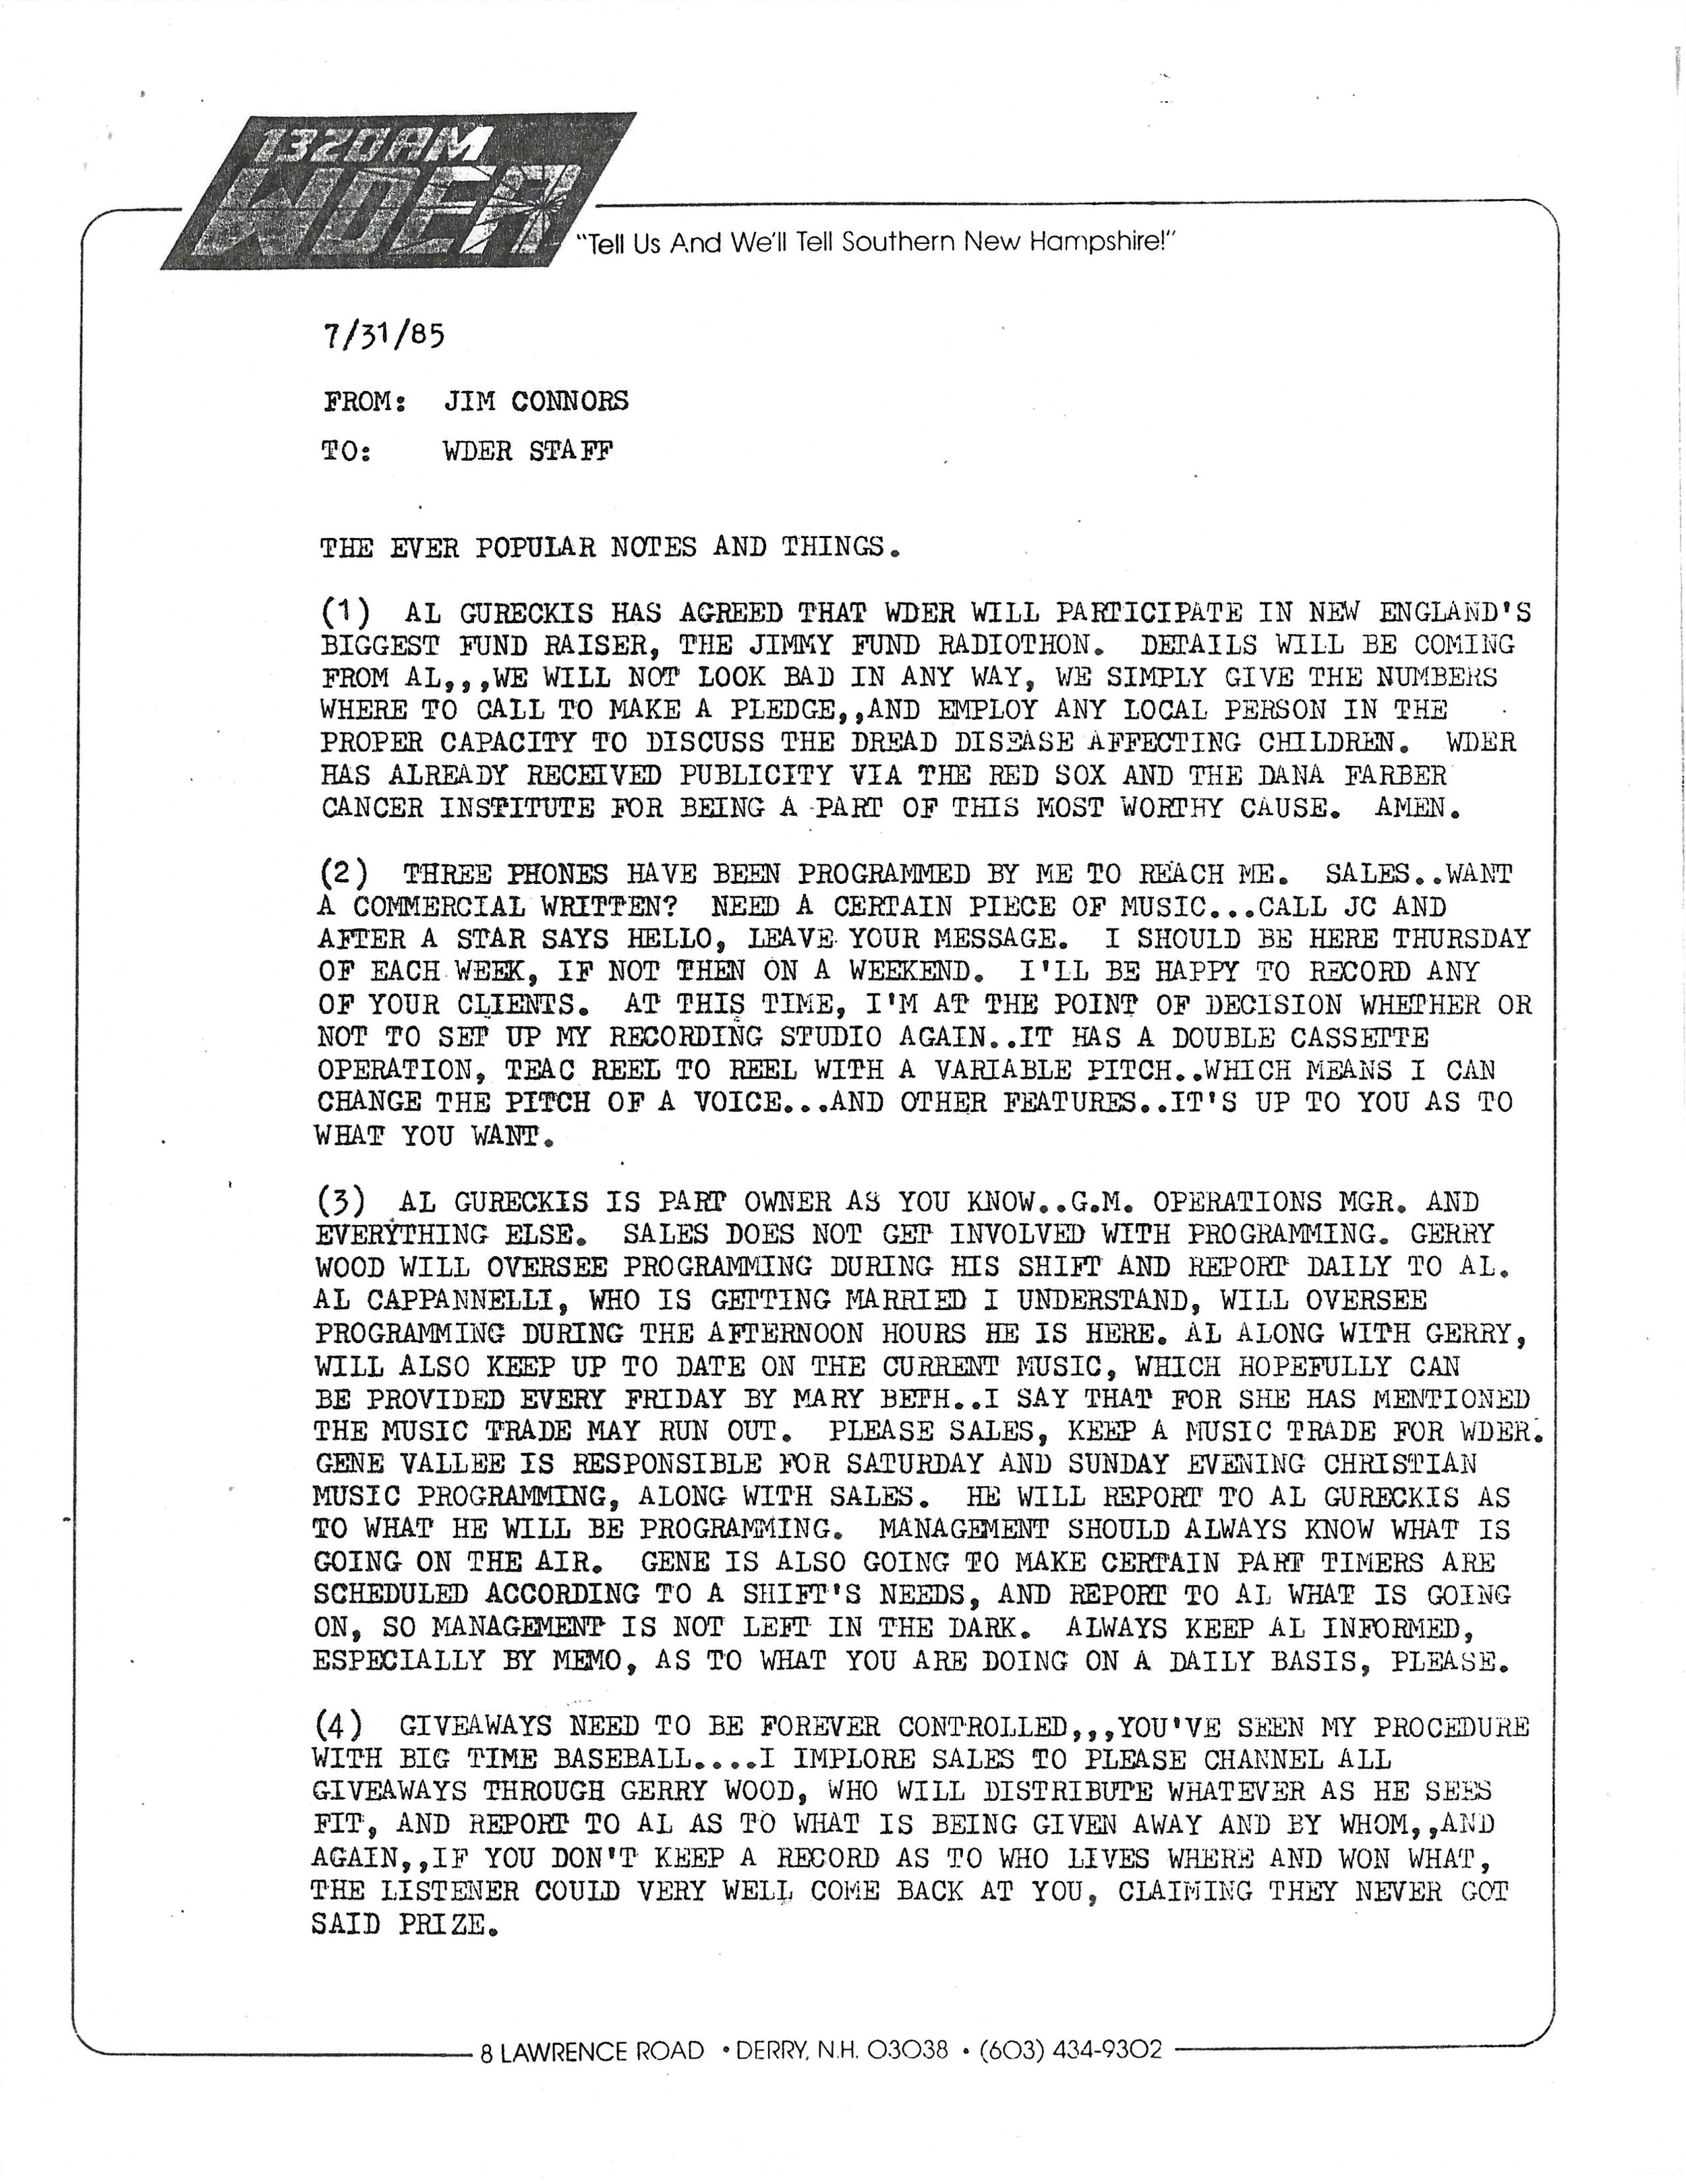 WDER staff letter 1985 Jim Connors